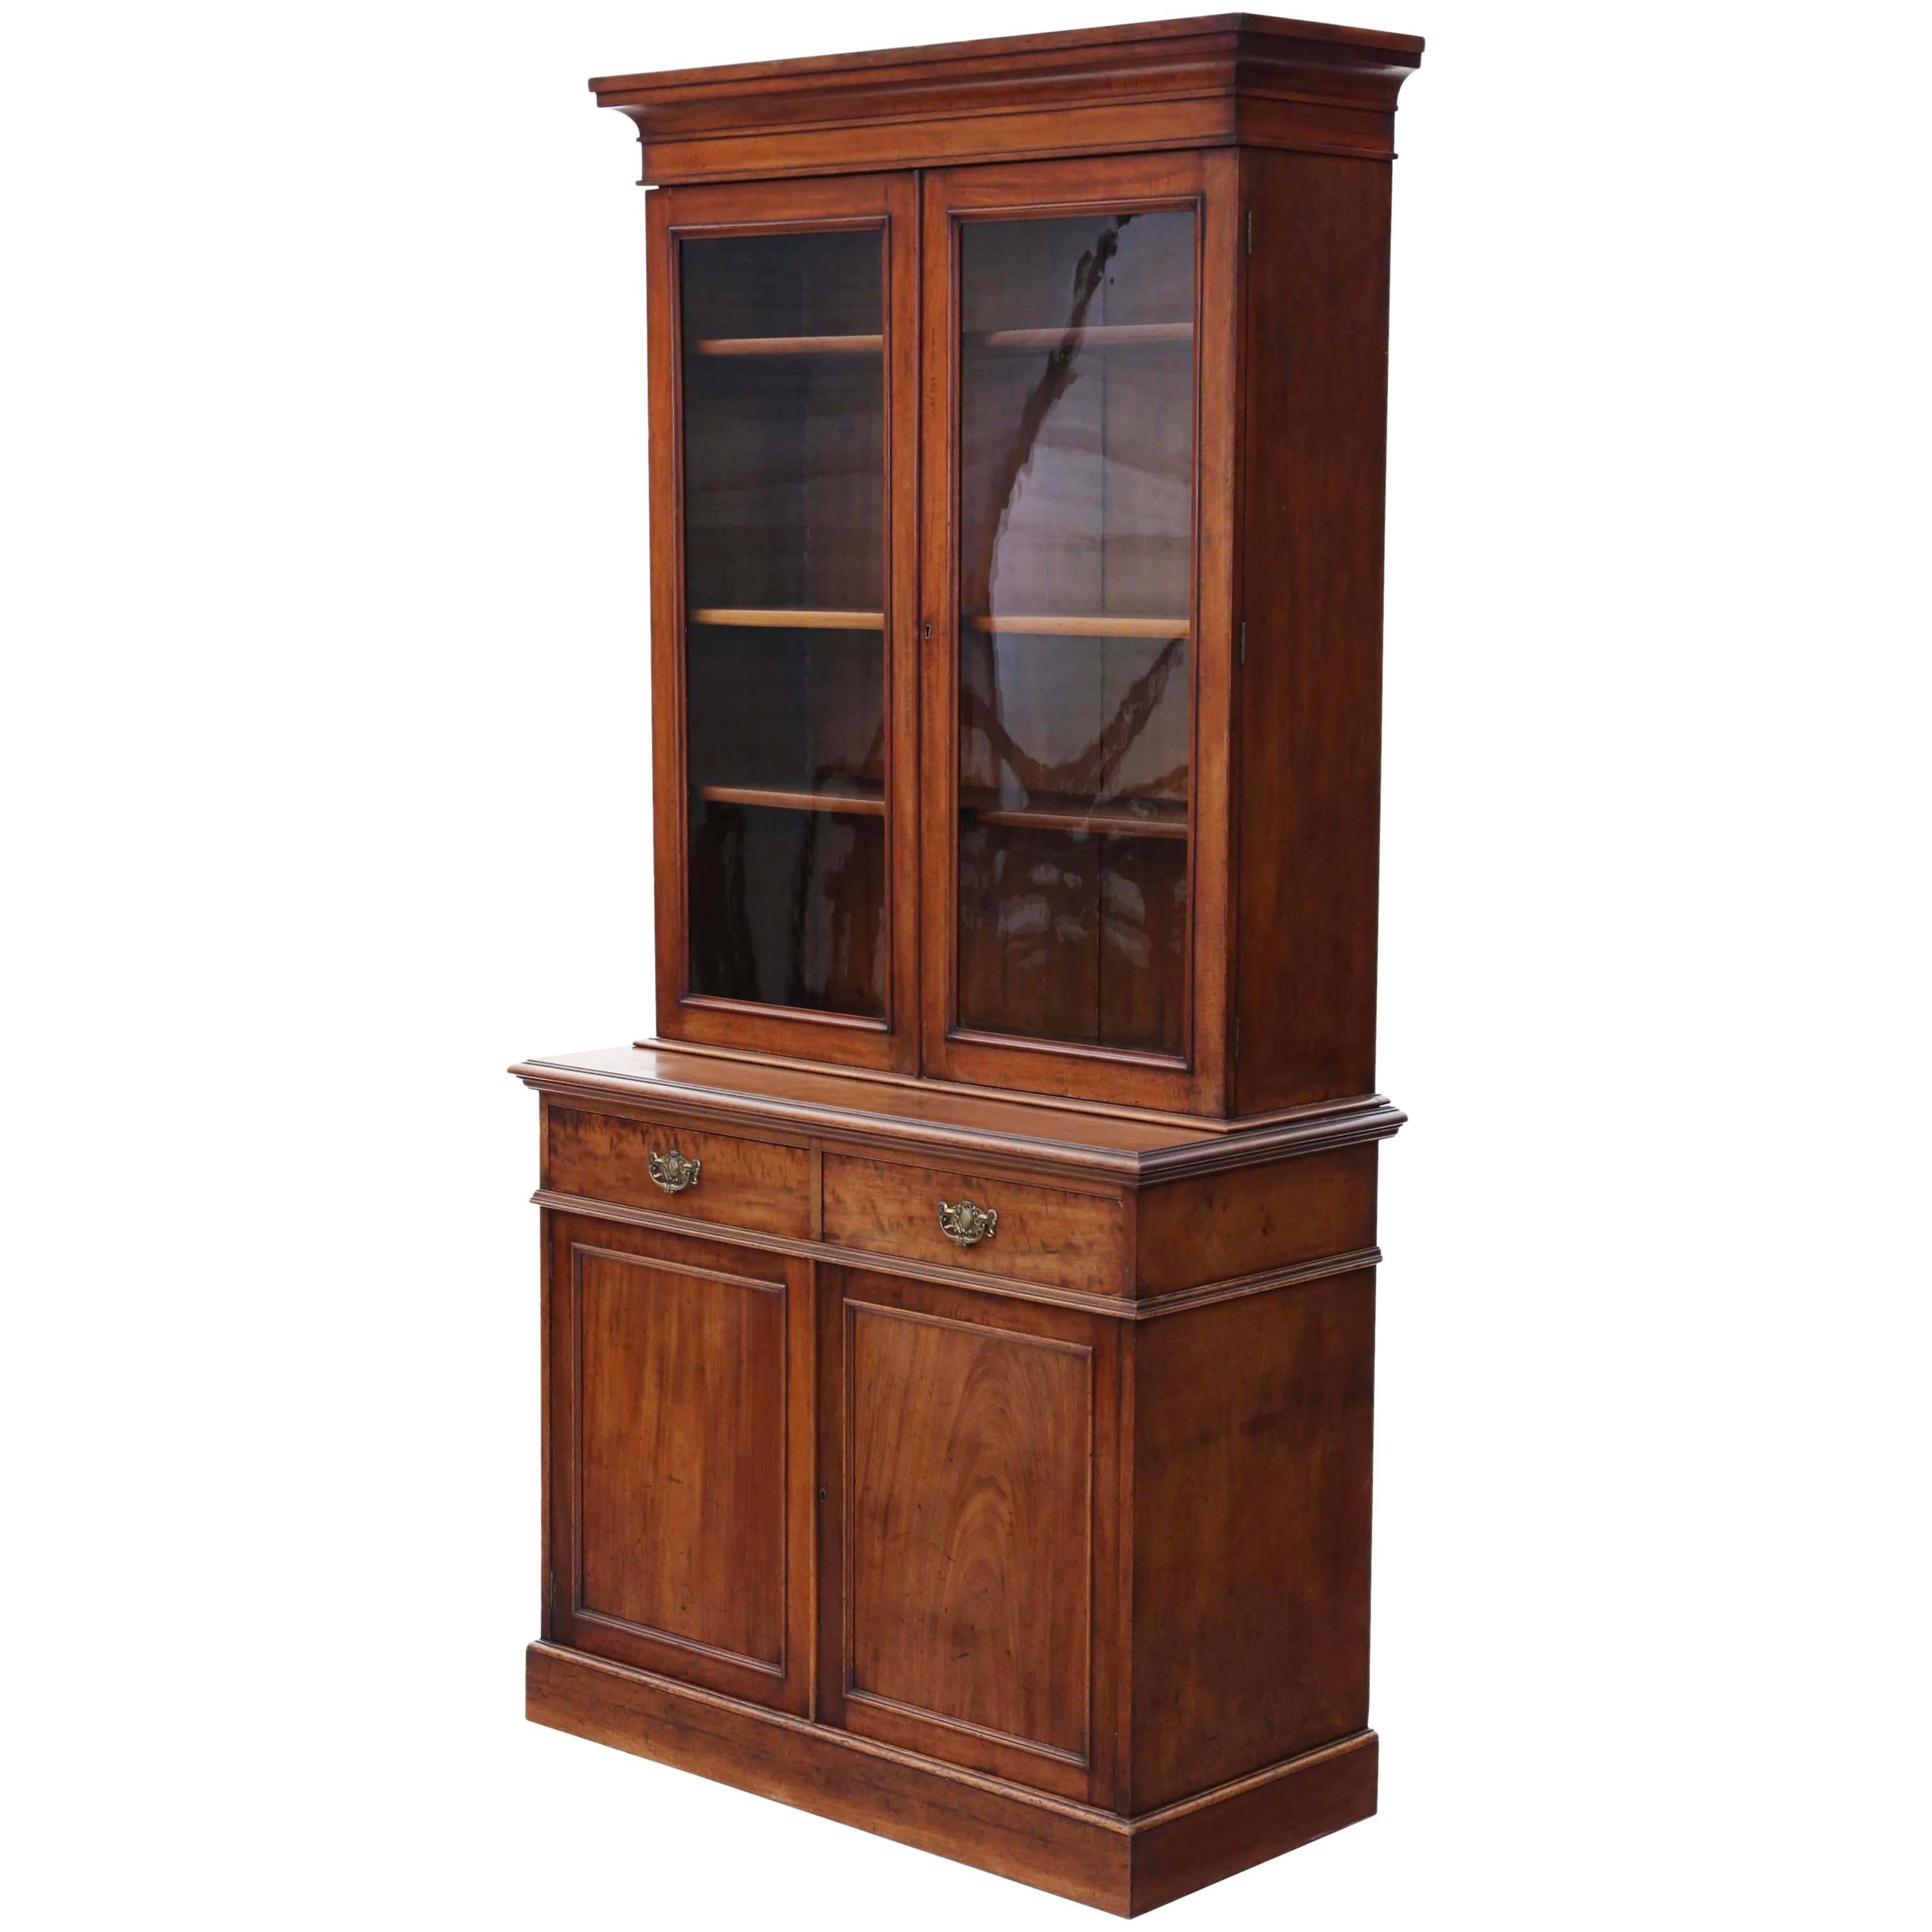 Antique Tall Victorian Mahogany Glazed Bookcase Cupboard Display Cabinet For Sale